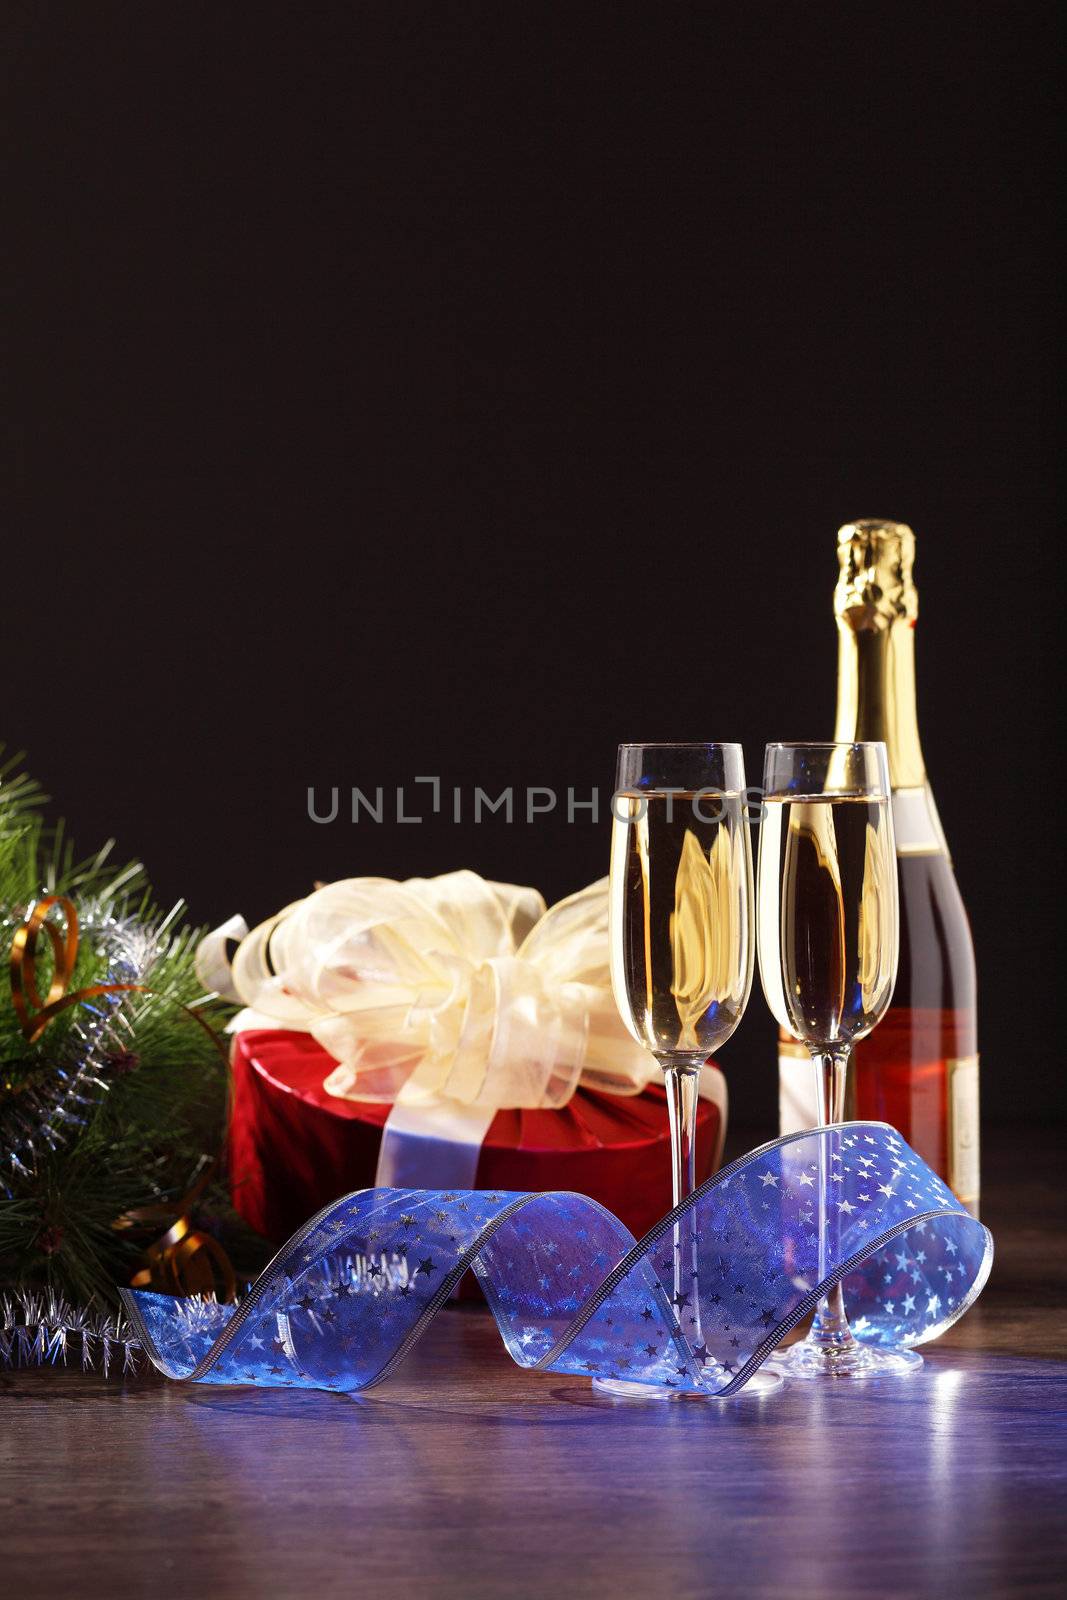 Glasses of champagne at new year party by sergey_nivens